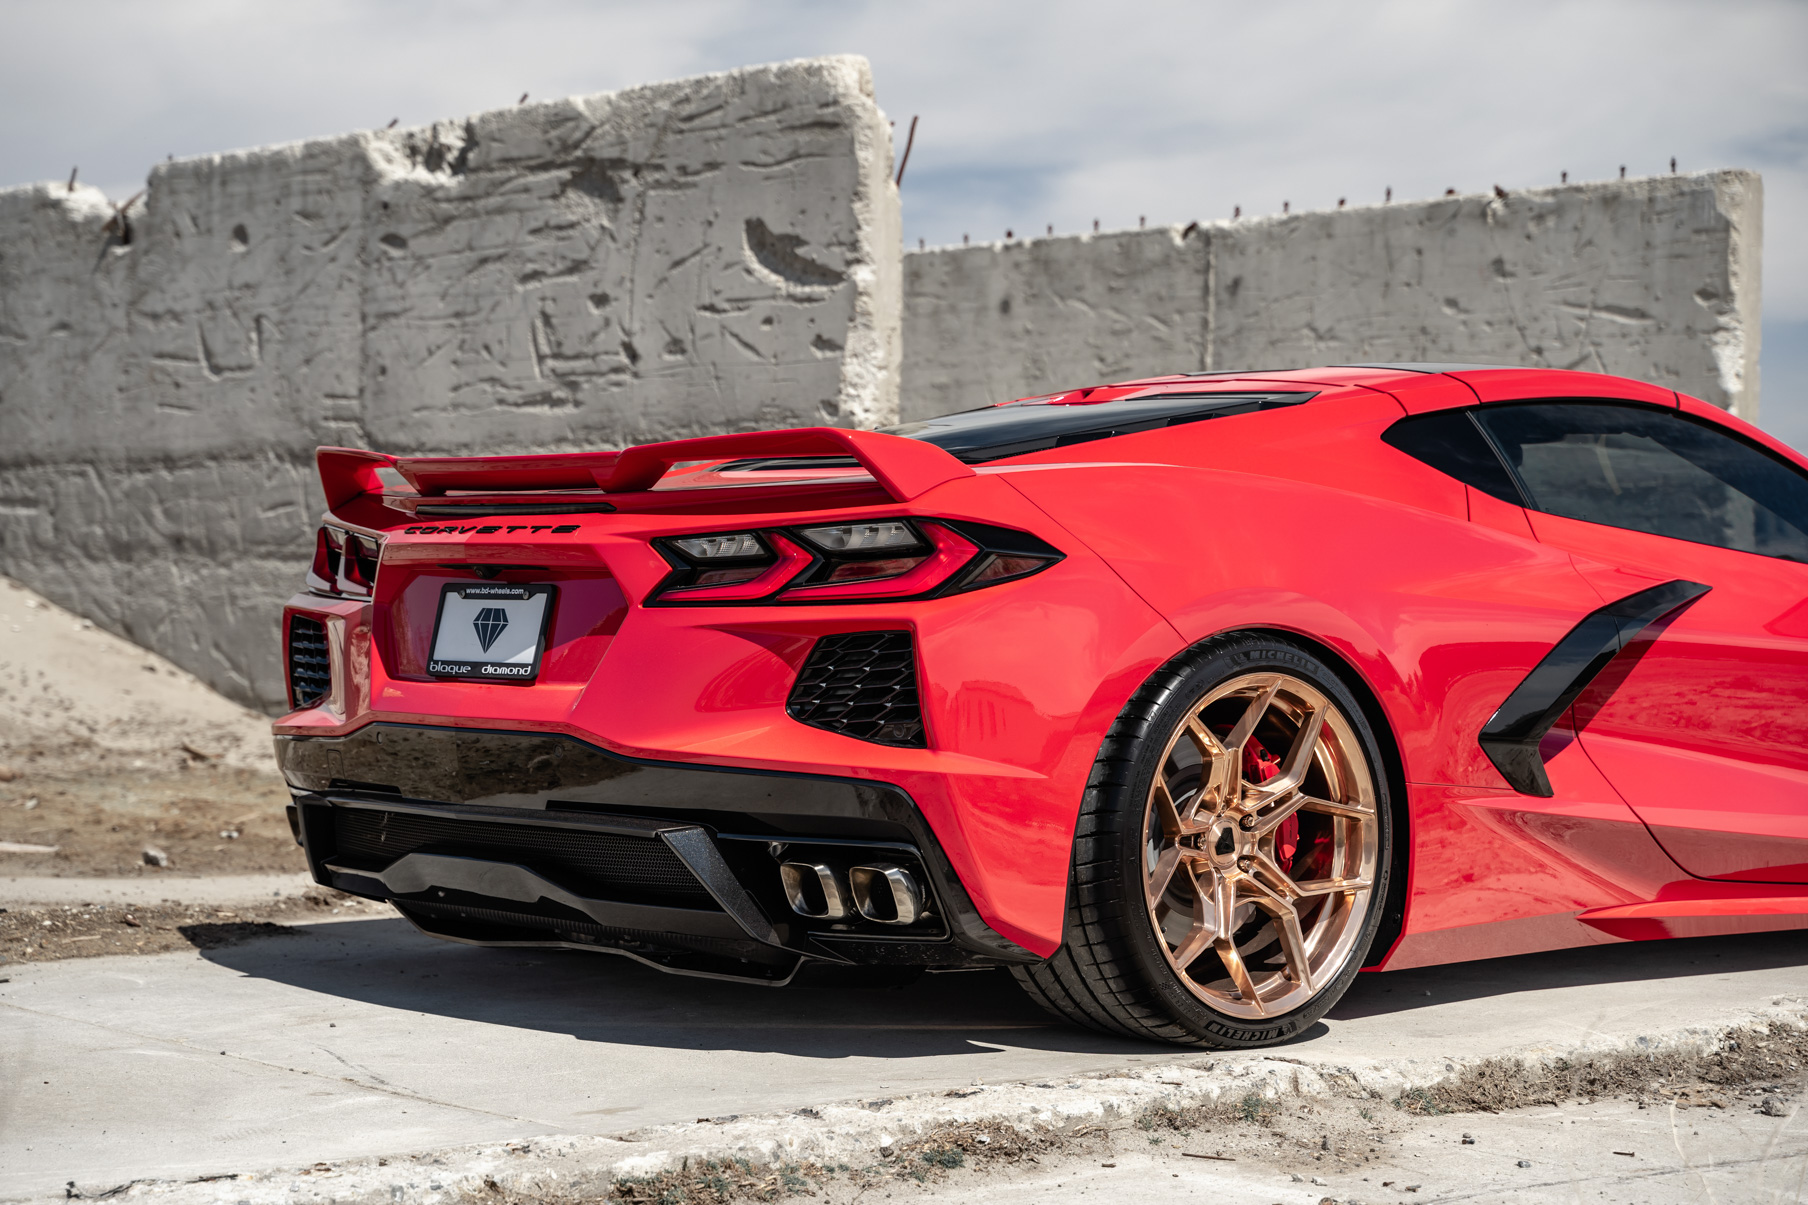 2020 Chevrolet Corvette C8 on Blaque Diamond F25 wheels in a Polished Rose Gold finish.